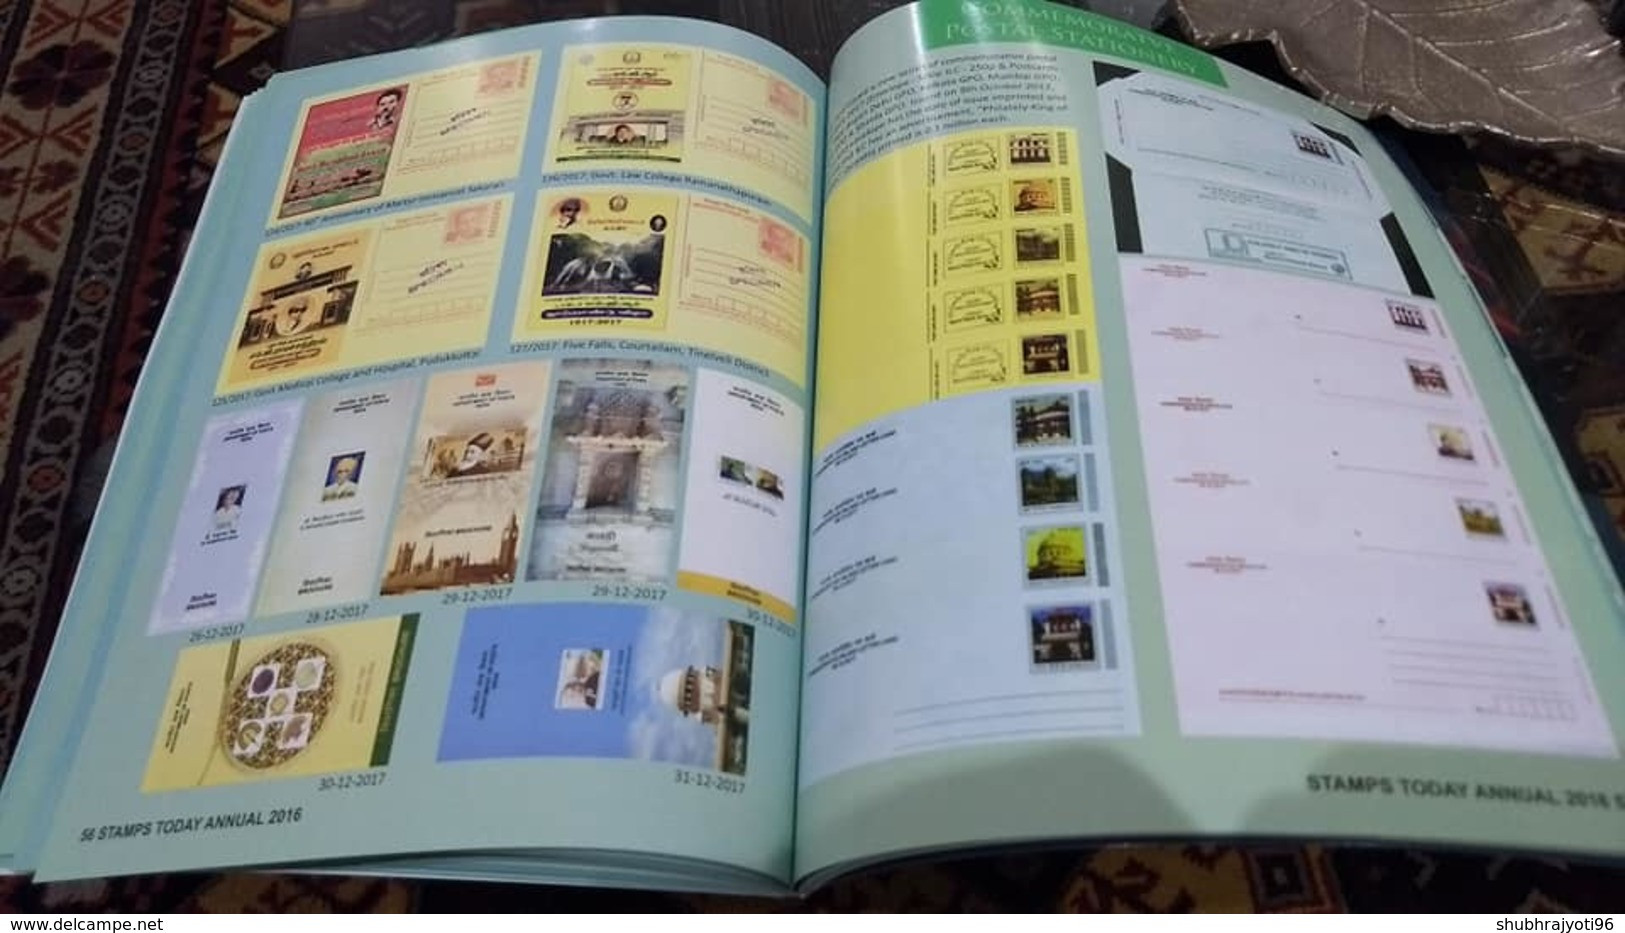 STAMP TODAY India annual catalogue 2017 Colourful Year book- Published June 2018